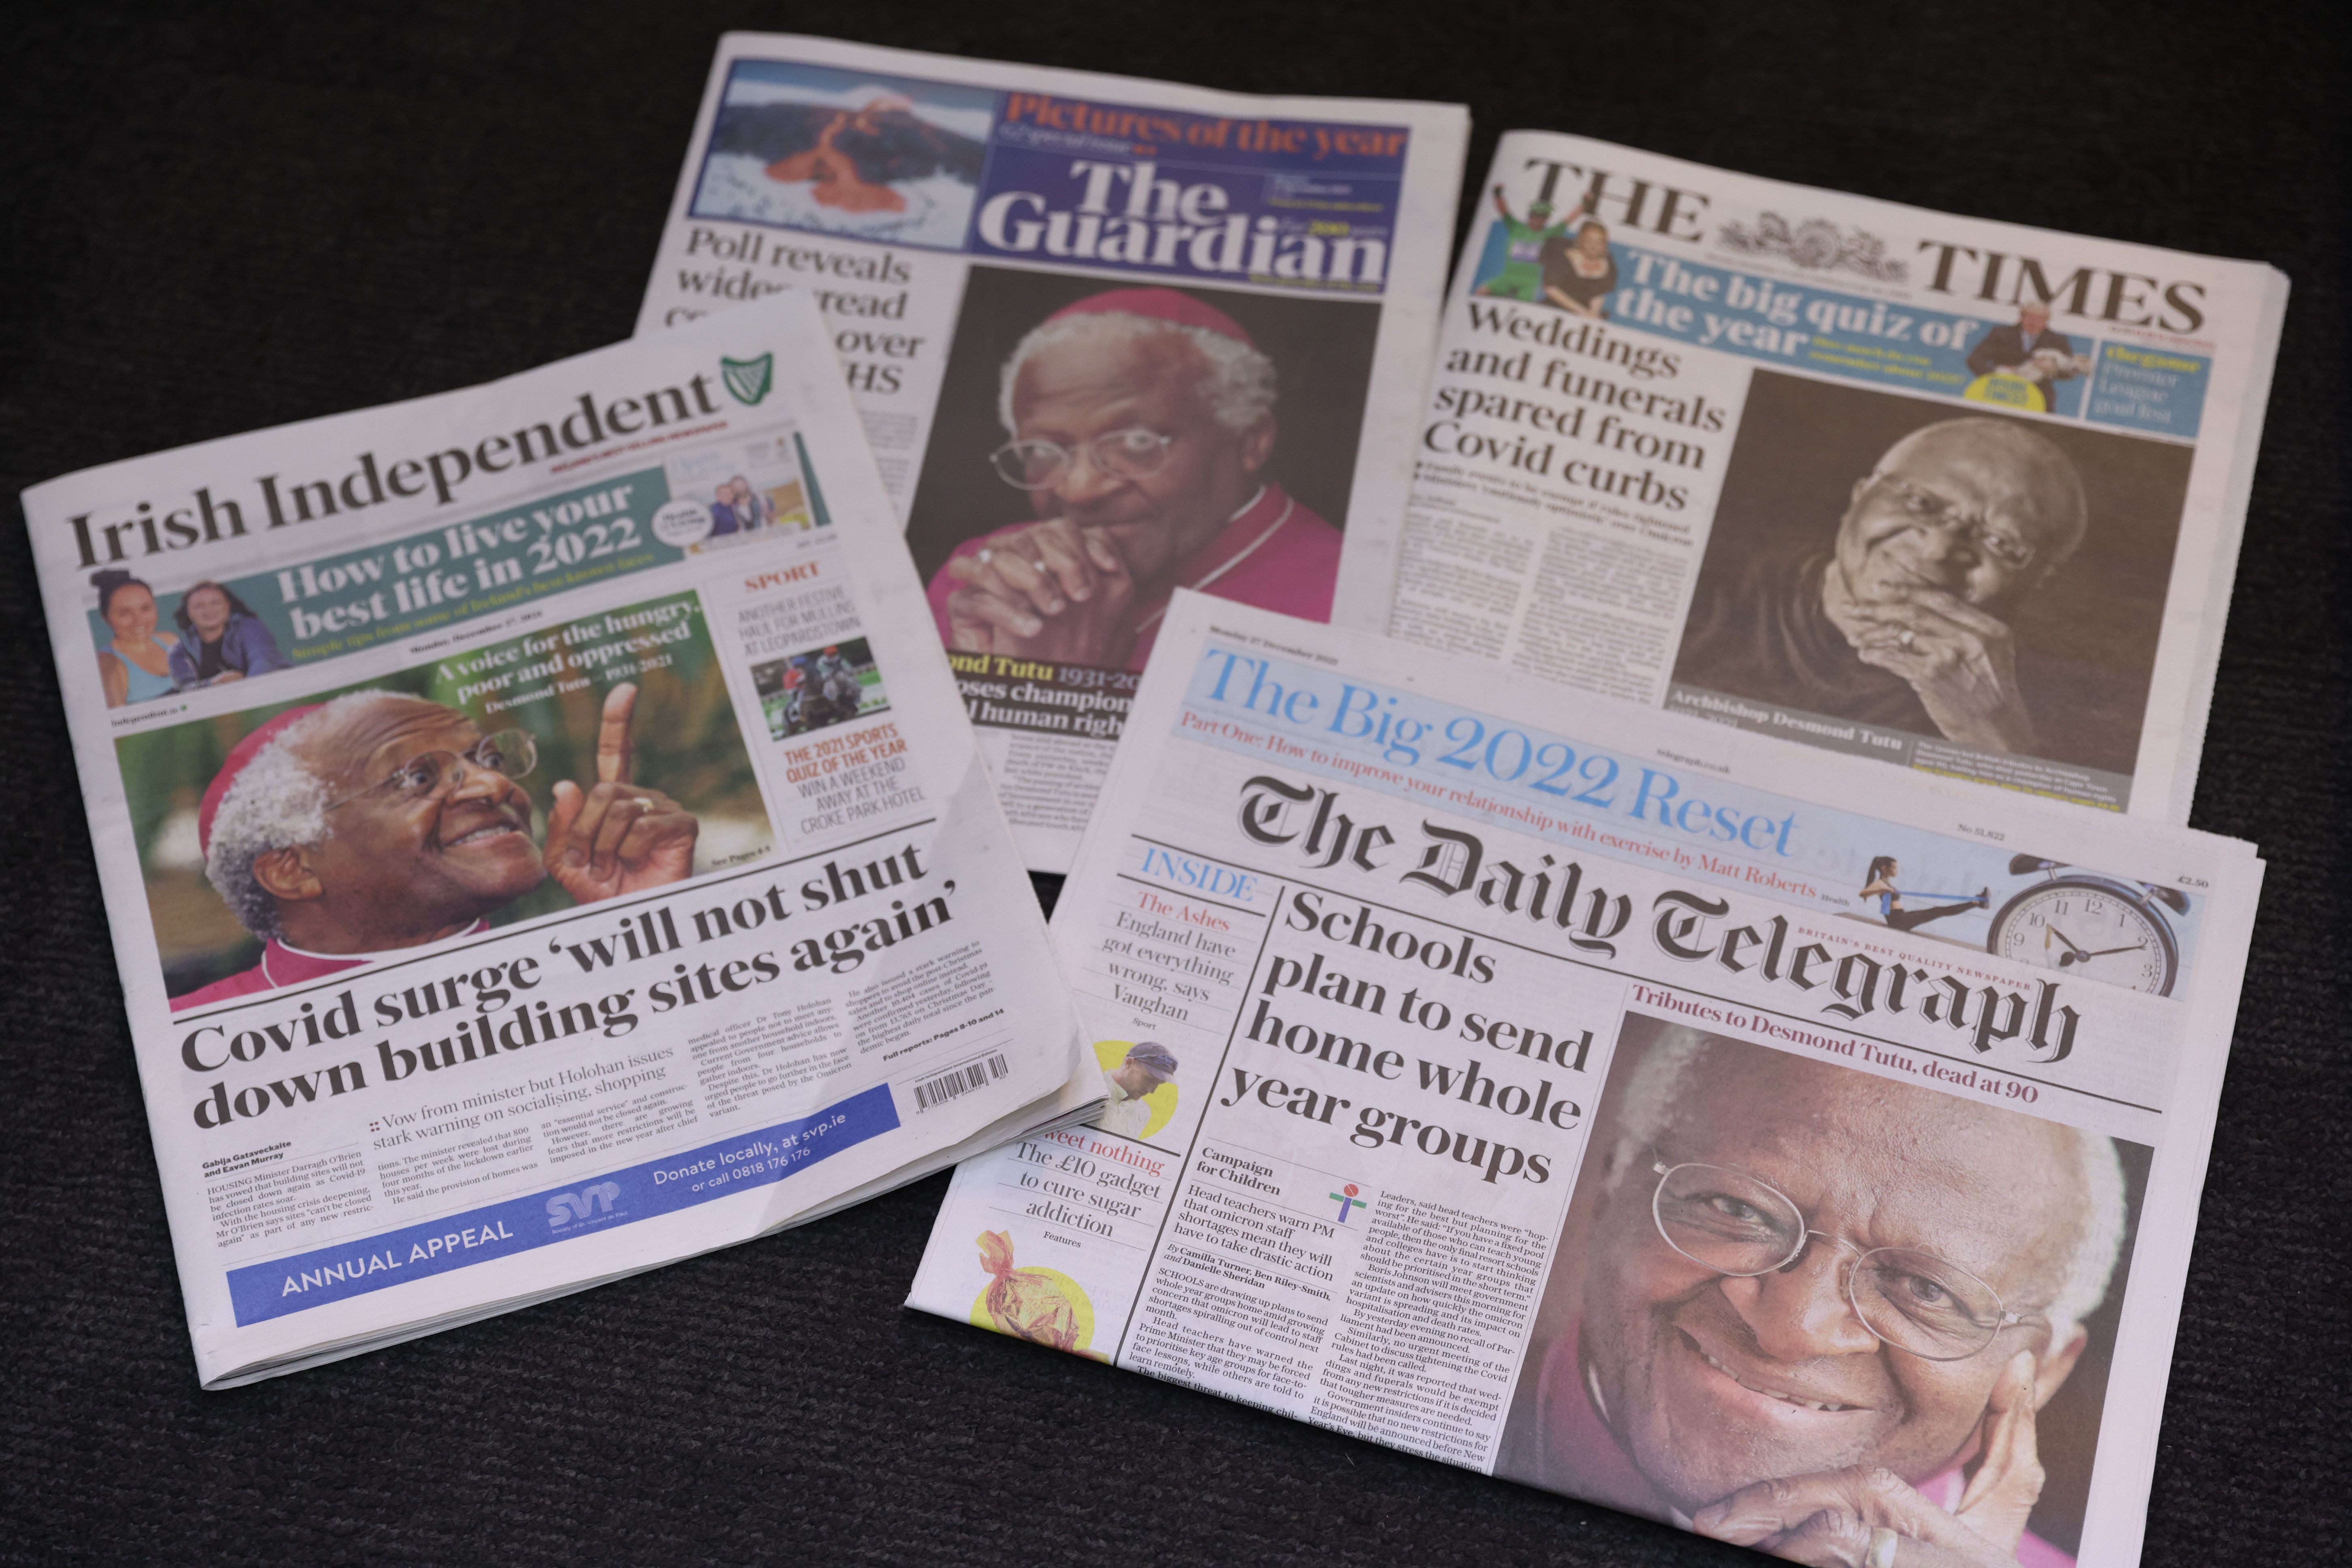 This photo illustration shows an assortment of newspaper front pages featuring Desmond Tutu, including The Guardian, The Times, The Daily Telegraph and the Irish Independent's.